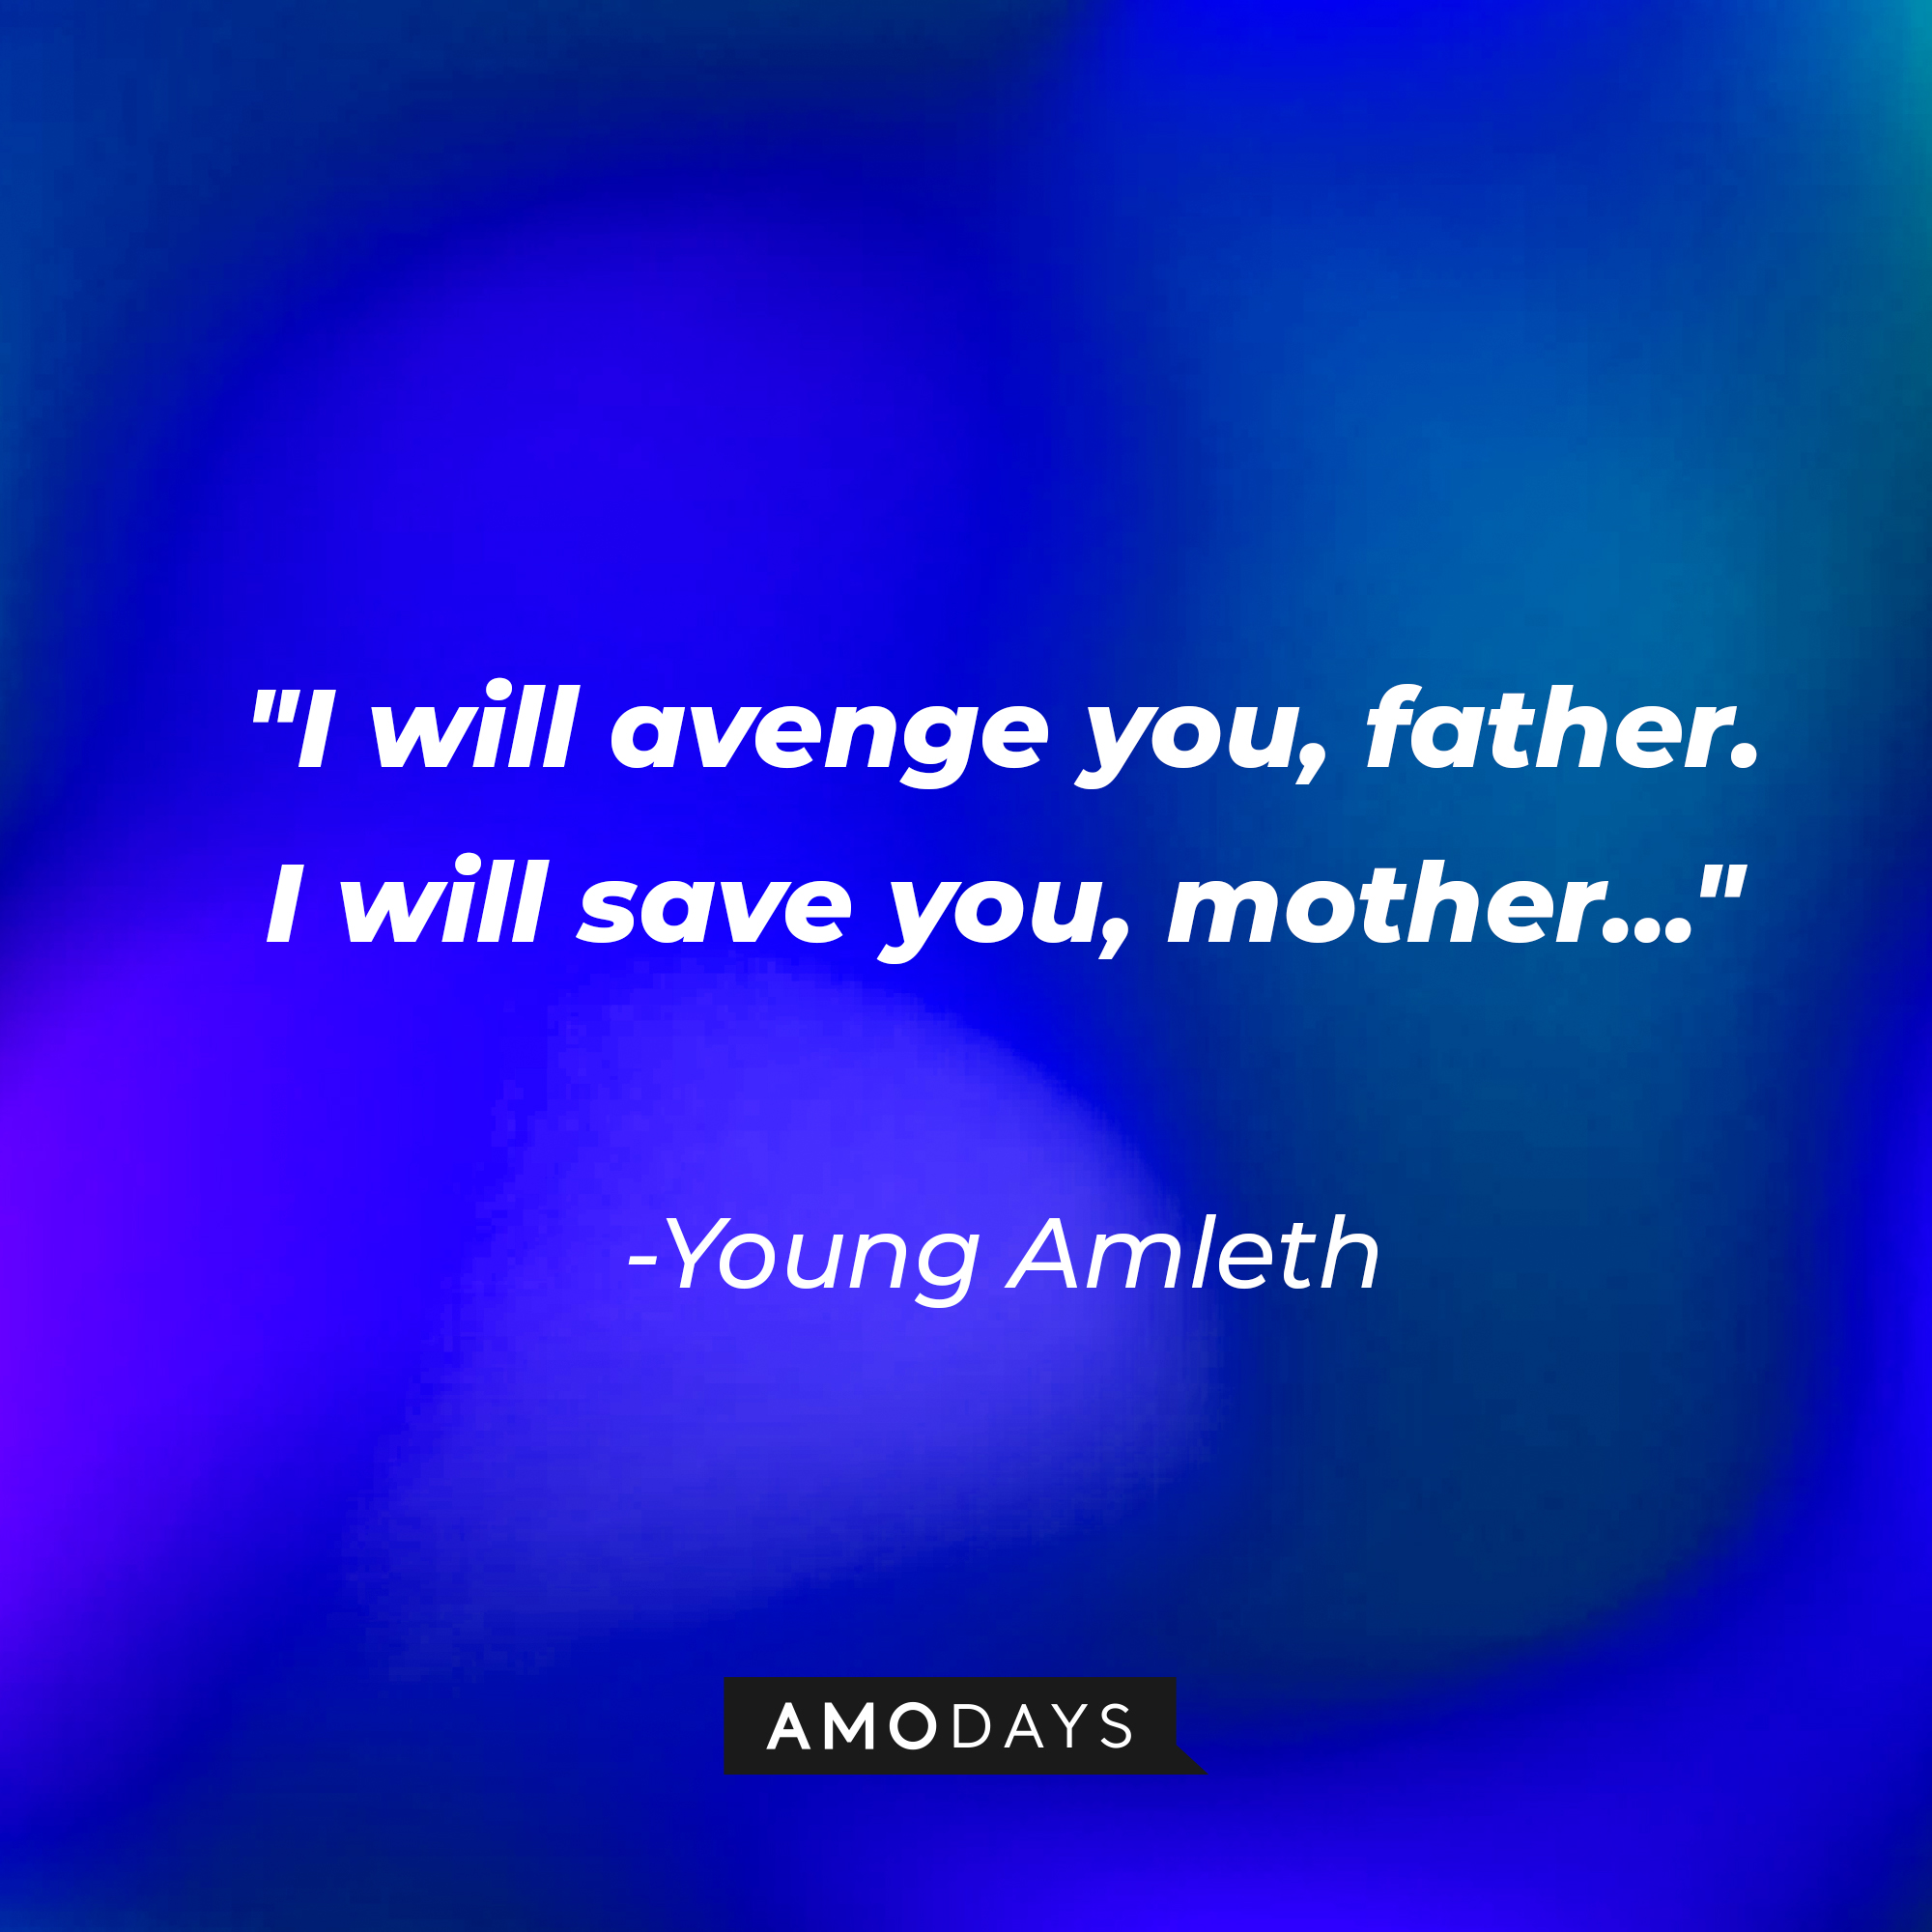 Young Amleth's quote: "I will avenge you, father. I will save you, mother..." | Source: AmoDays